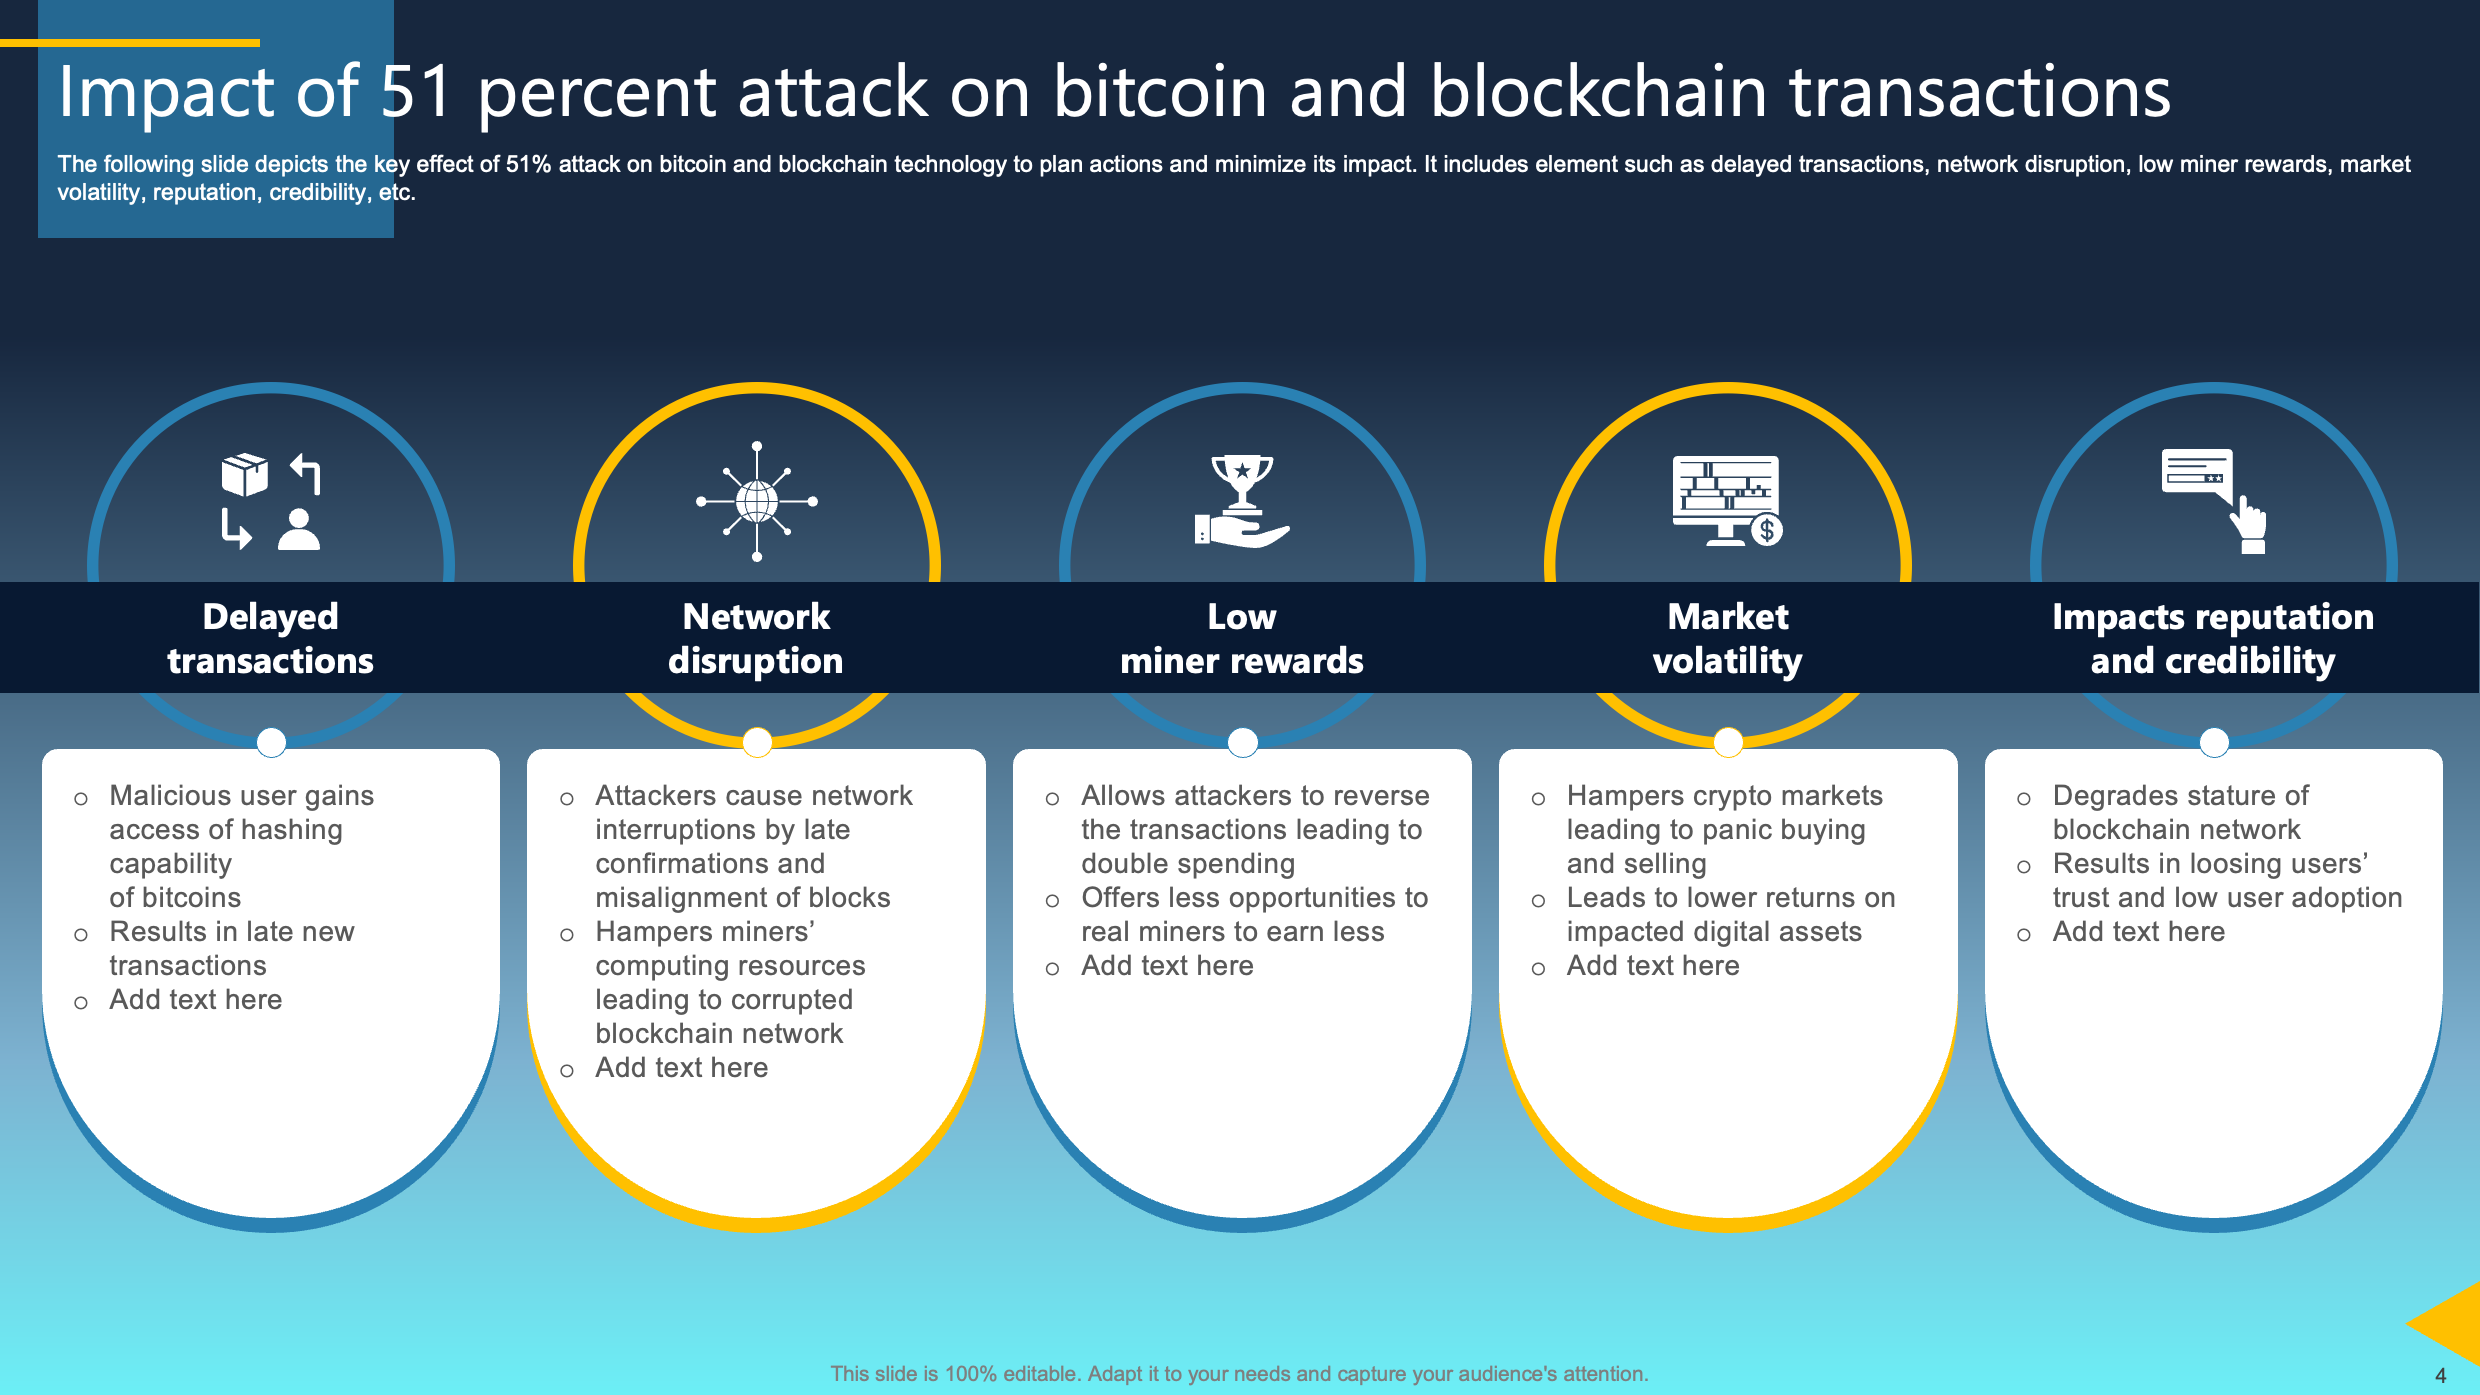 Impact of 51 Percent Attack on Bitcoin and Blockchain Transactions